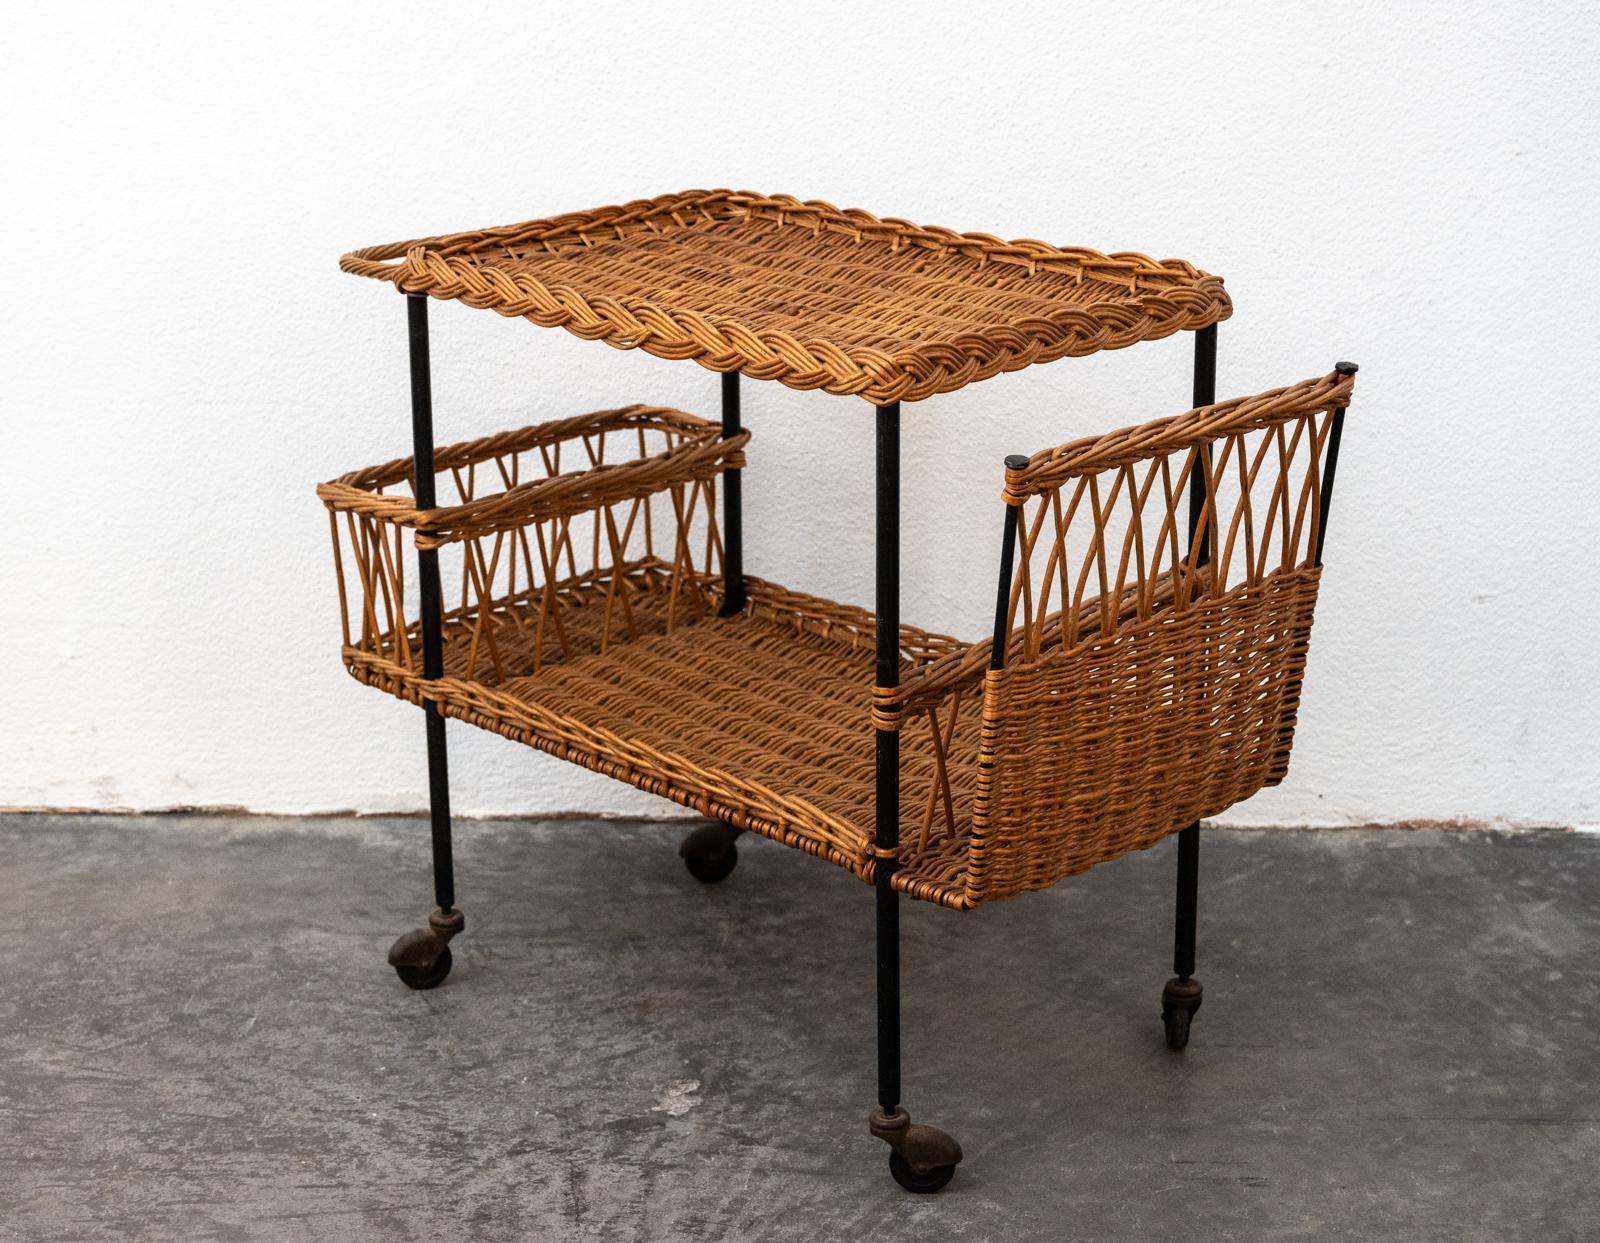 1950s French “Table roulante” mid century French rattan and steel drinks trolley attributed to Raoul Guys.